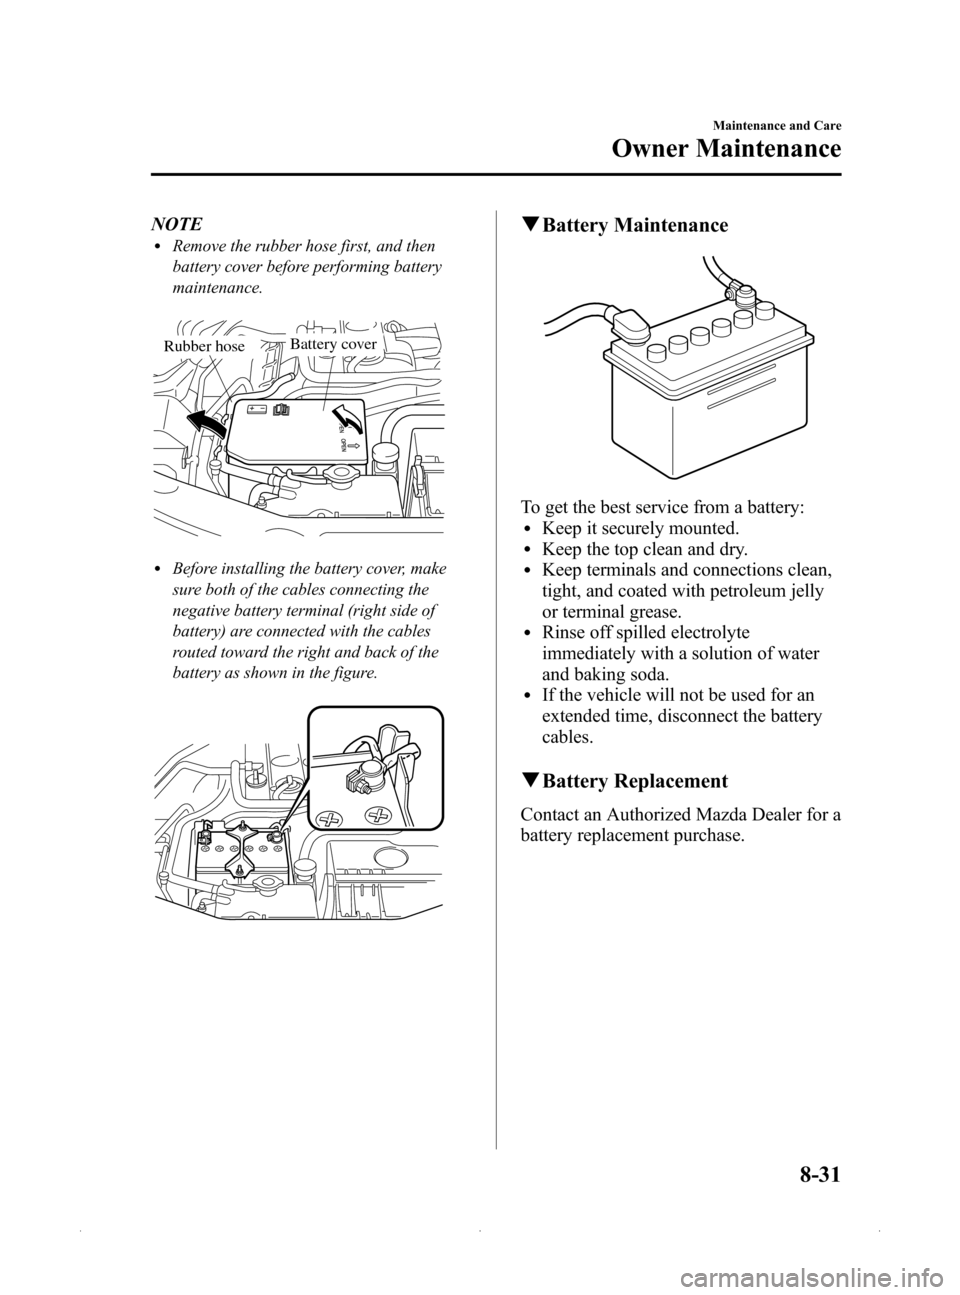 MAZDA MODEL MX-5 2015  Owners Manual (in English) Black plate (357,1)
NOTElRemove the rubber hose first, and then
battery cover before performing battery
maintenance.
 Battery coverRubber hose
lBefore installing the battery cover, make
sure both of t